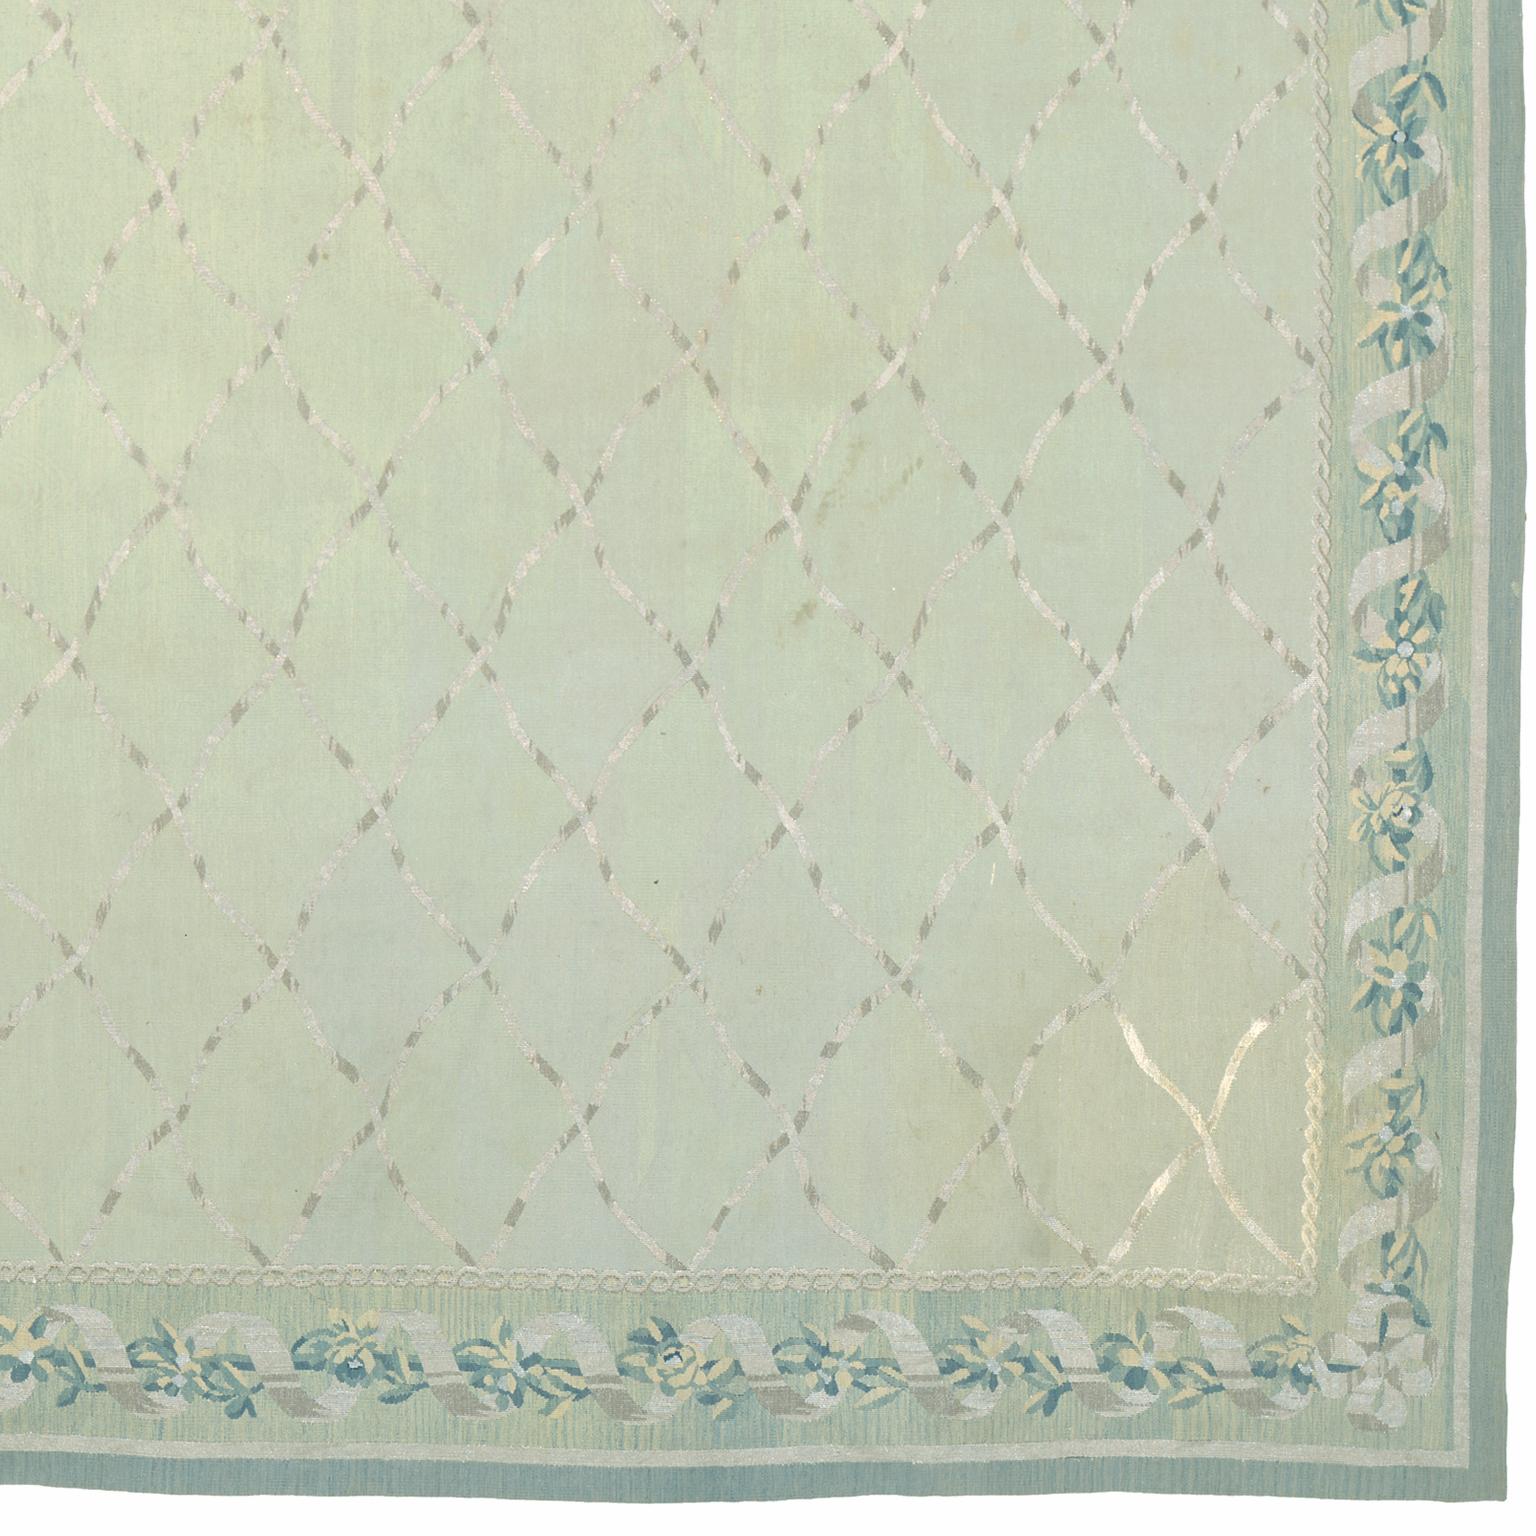 French Aubusson rug by Stéphane Boudin of Jansen
France circa 1950
A light celadon field with a silver metallic thread ribbon trellis overall within a light blue metallic ribbon and rosette vinery border.
Designed by Stéphane Boudin of Jansen.